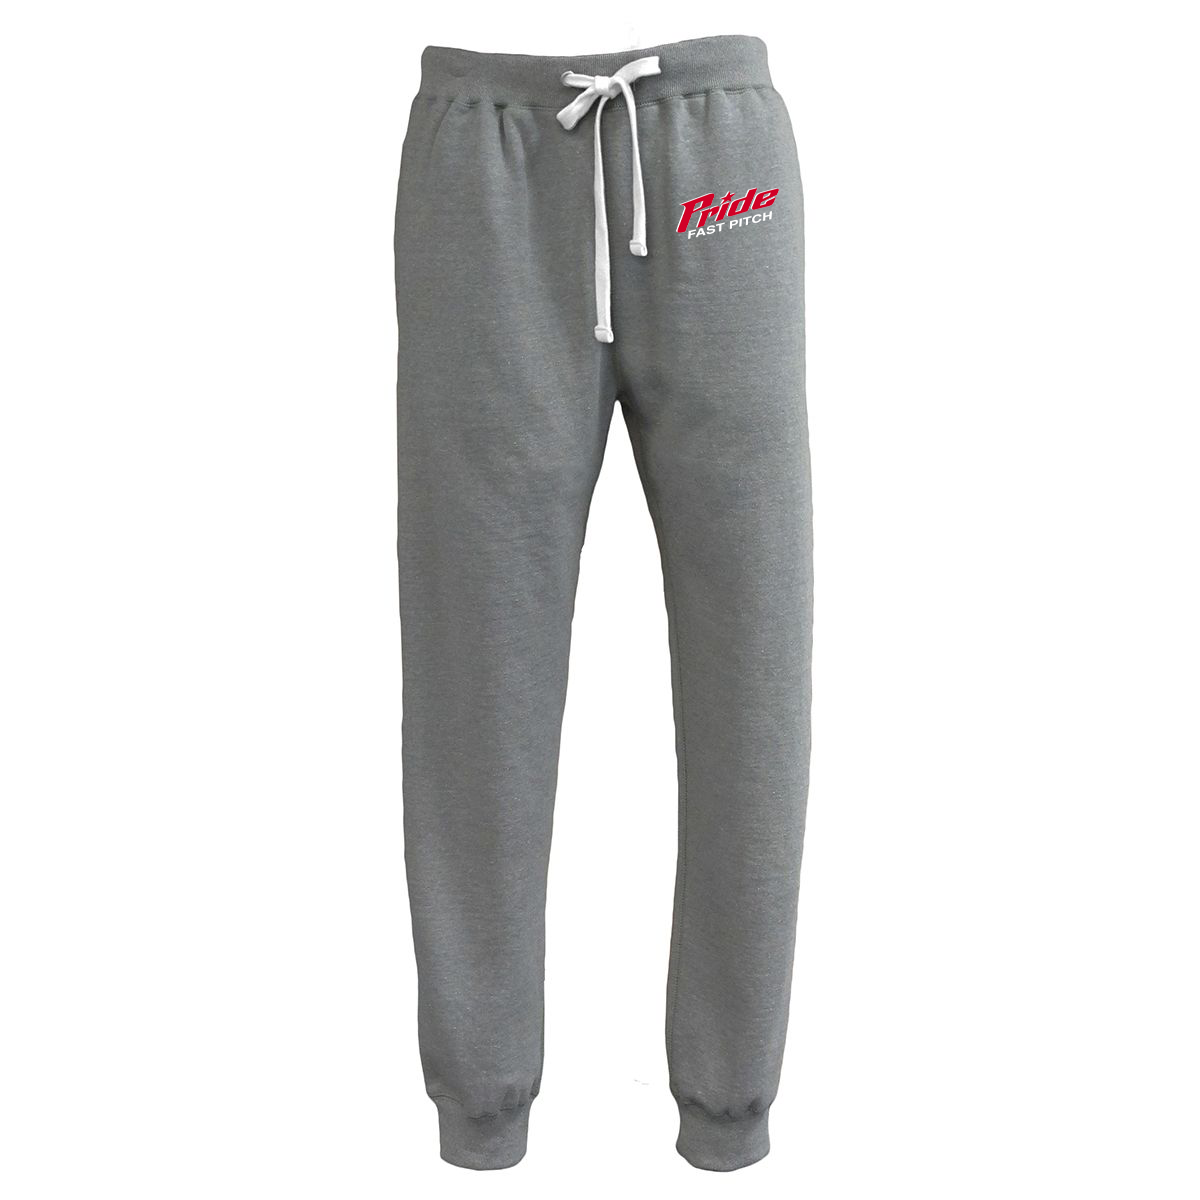 Long Island Pride Fastpitch Joggers